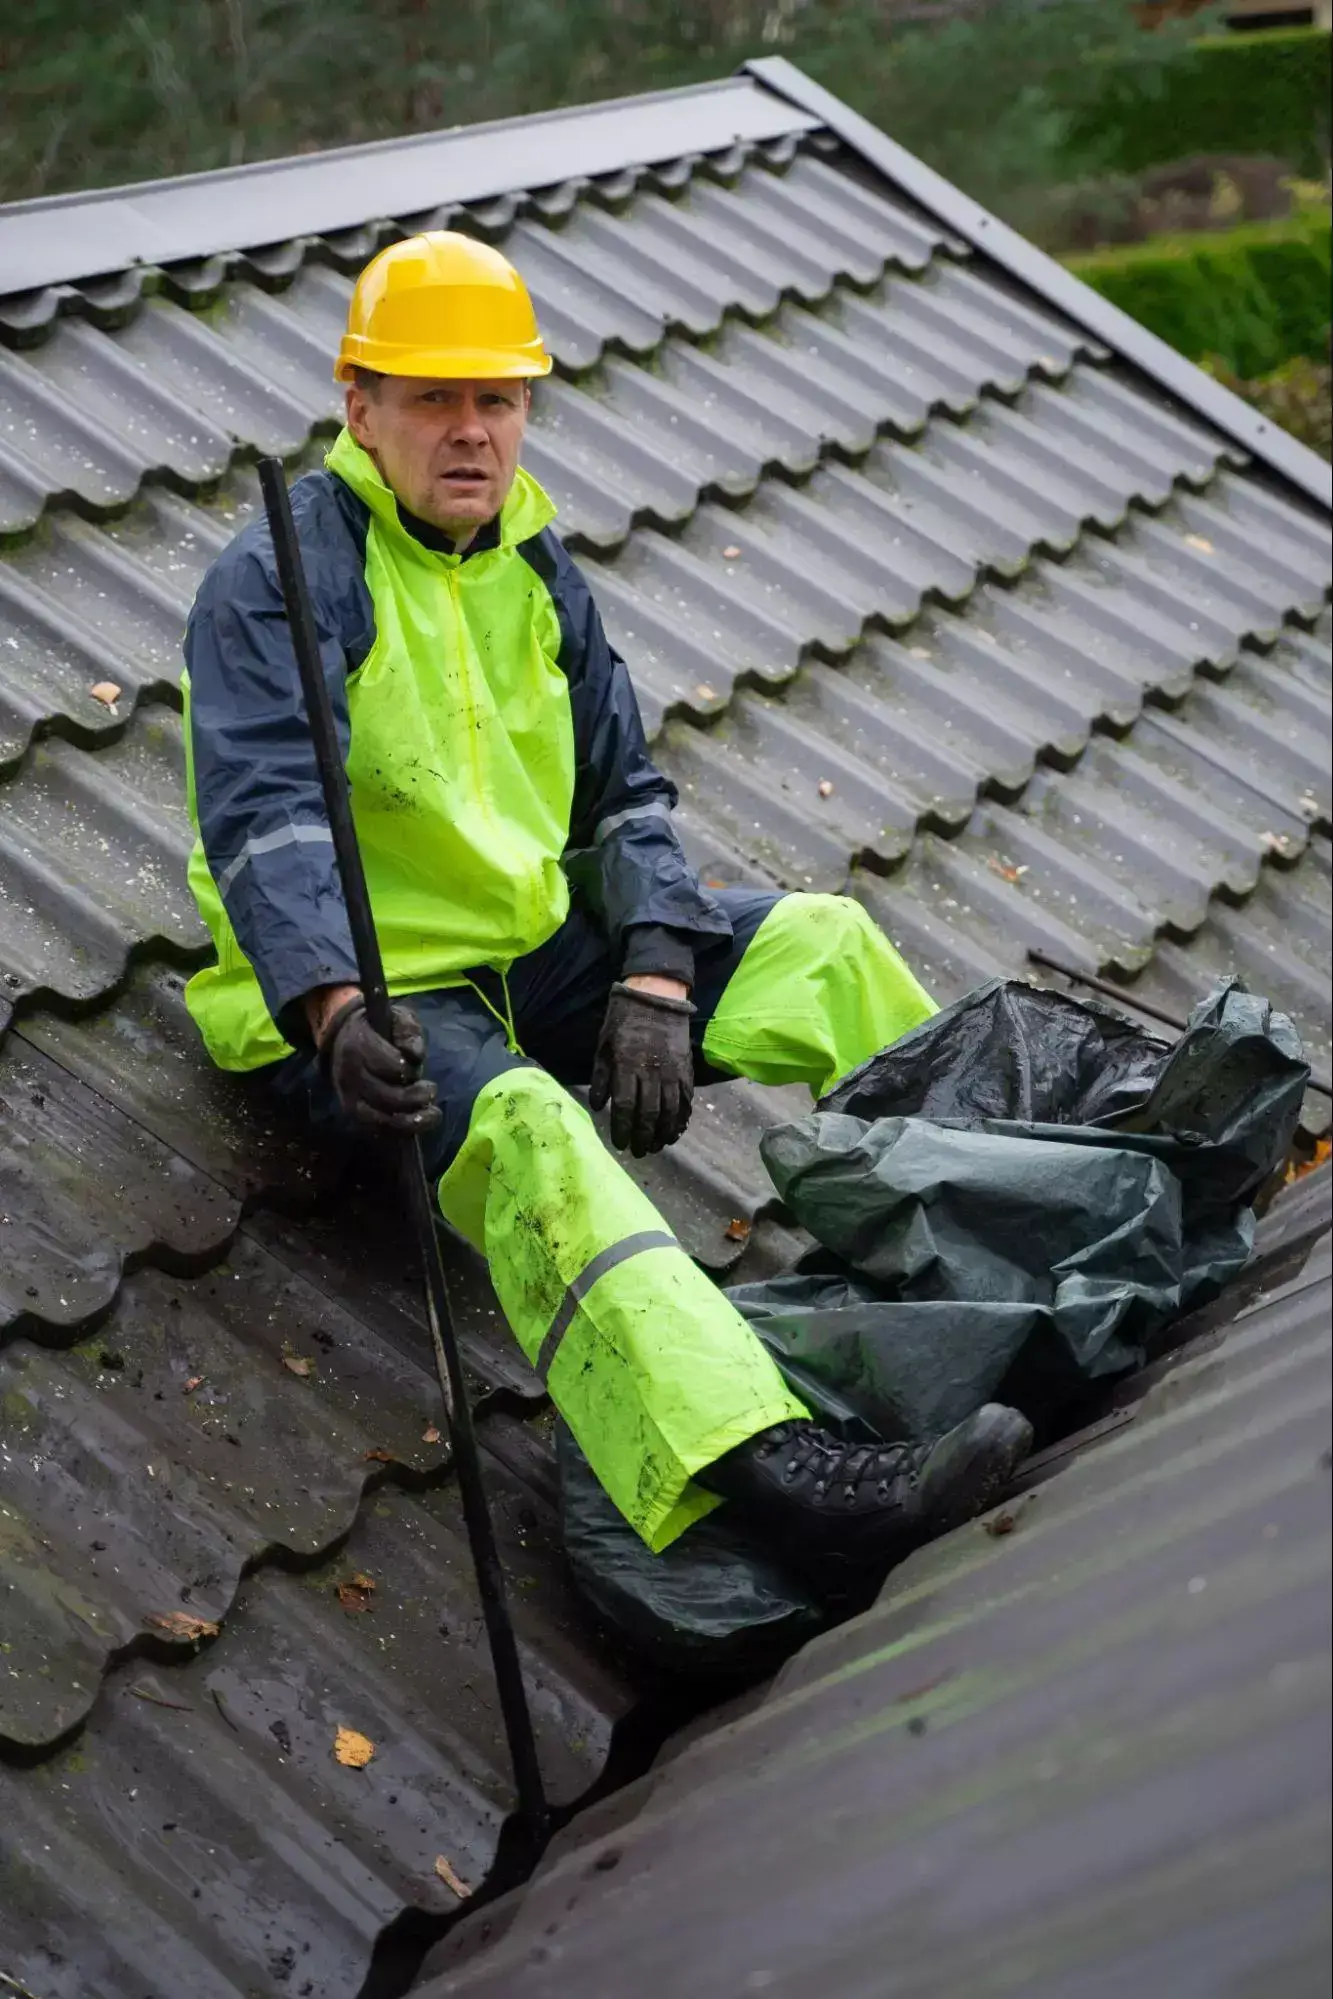 House Cleaning Worker Sitting on the Roof Image